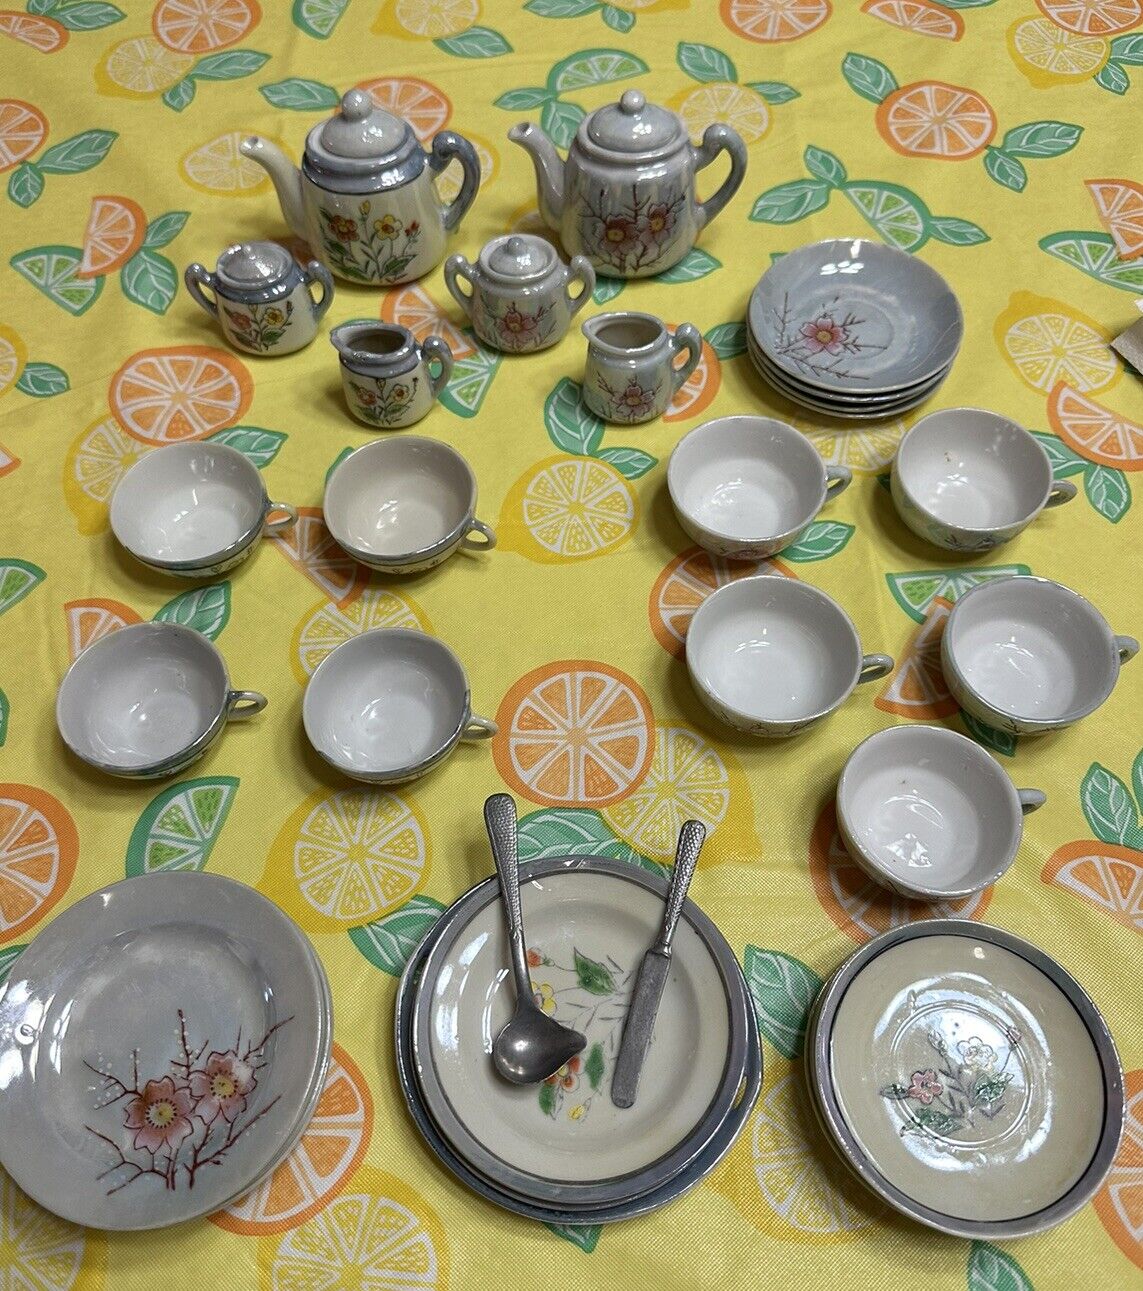 Antique Hand Painted Child’s Porcelain China Lusterware Tea Set from Japan